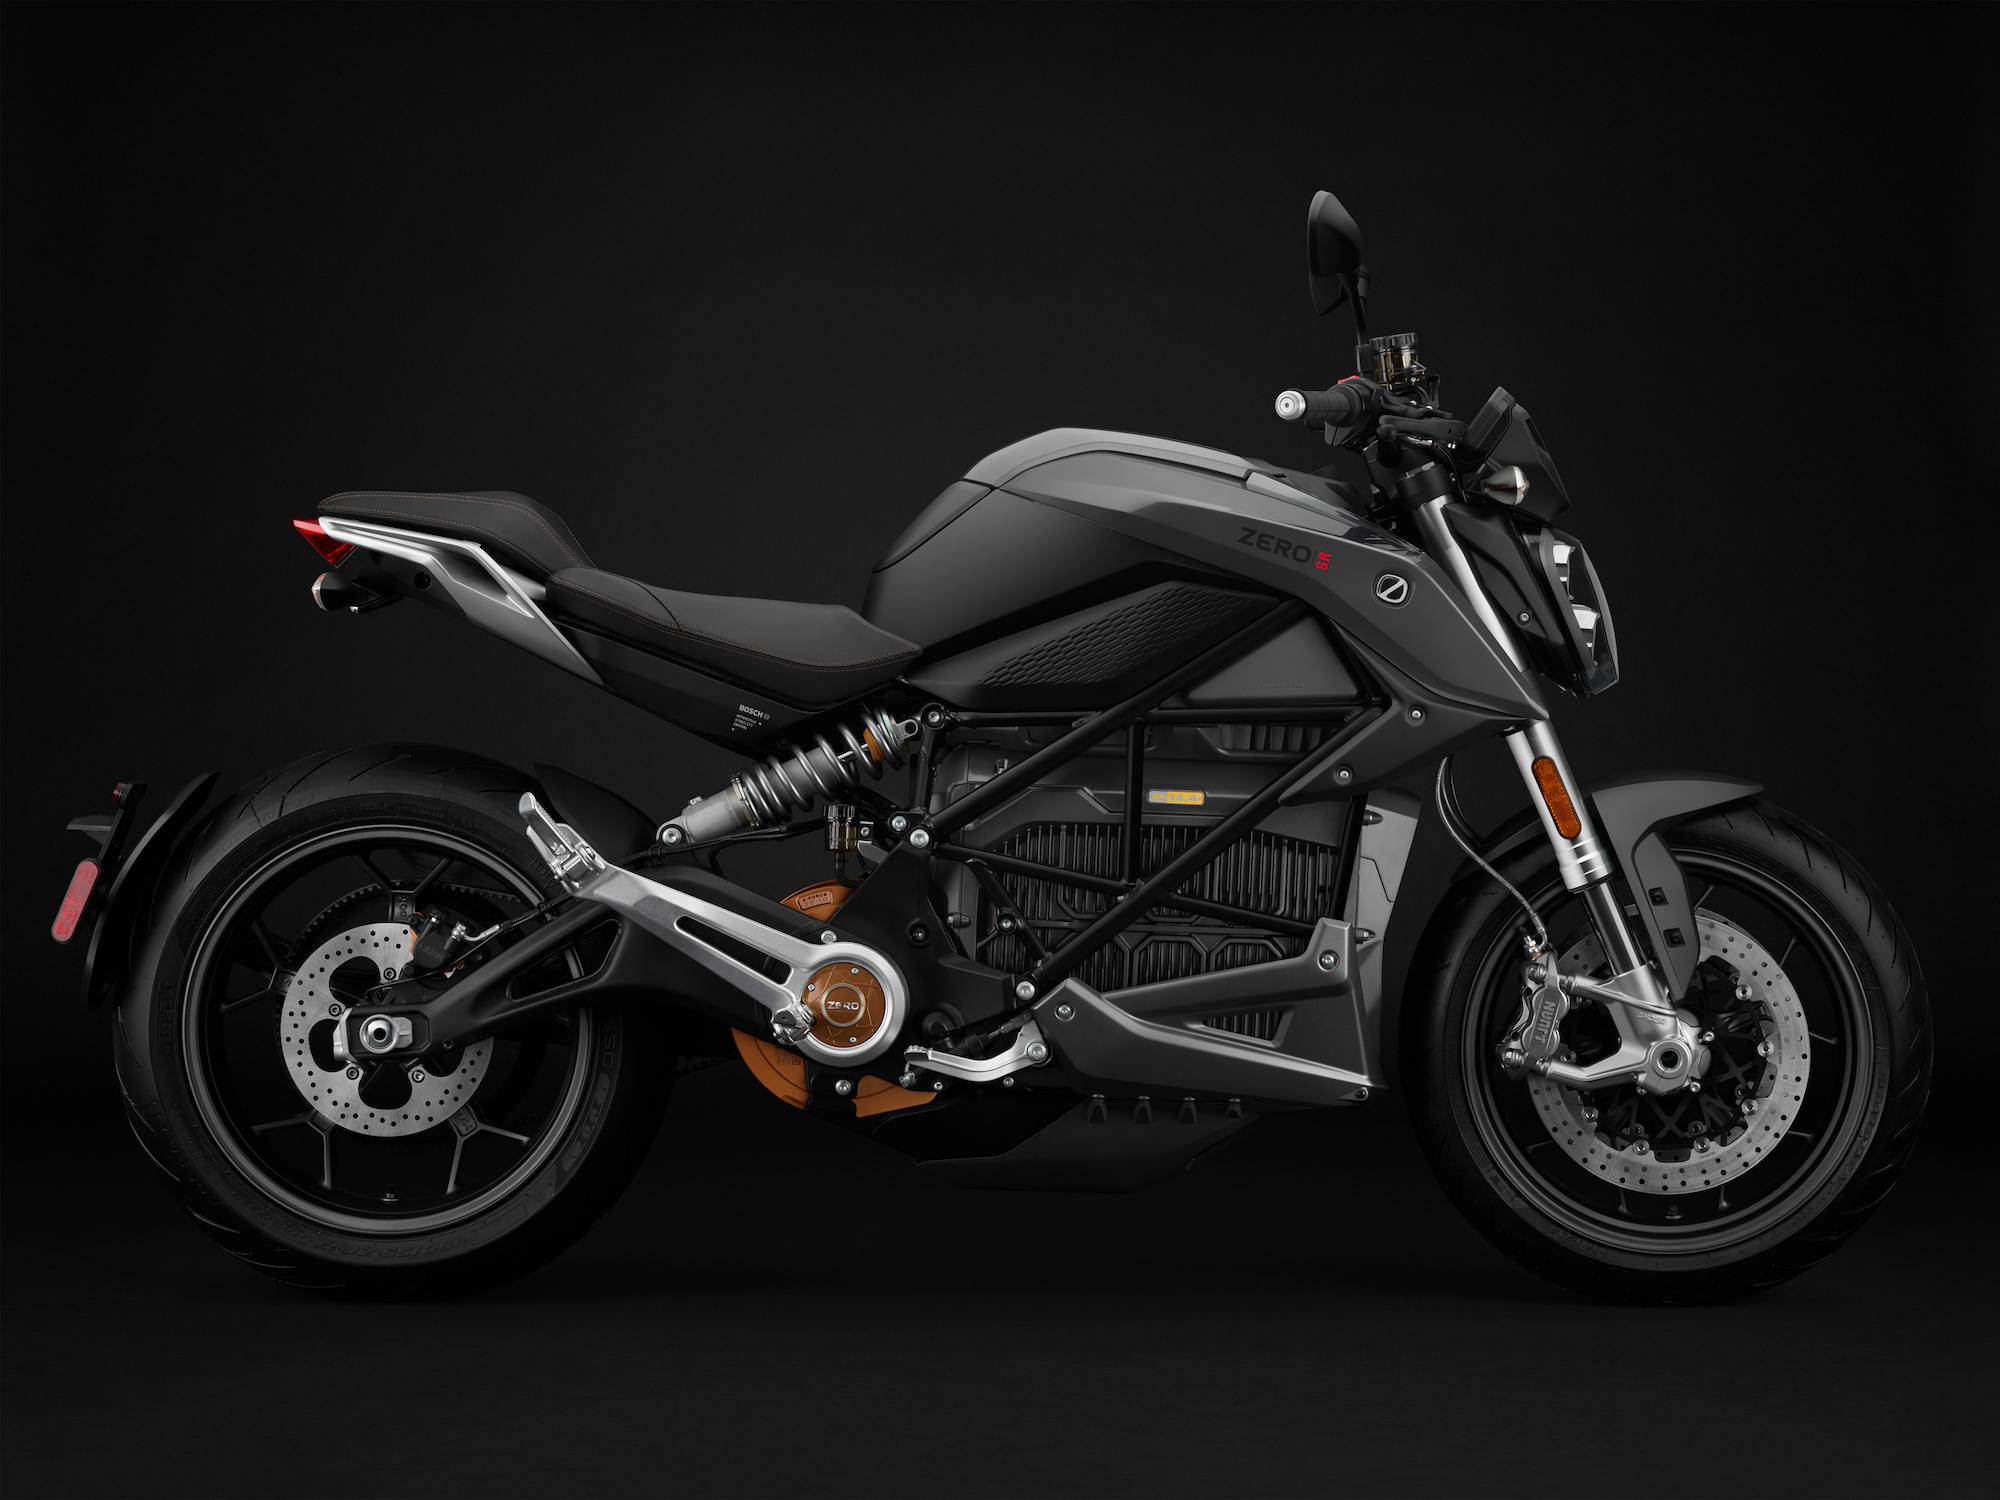 The 2022 Zero SR starts around $18,000 and makes use of the company's new battery tech. 